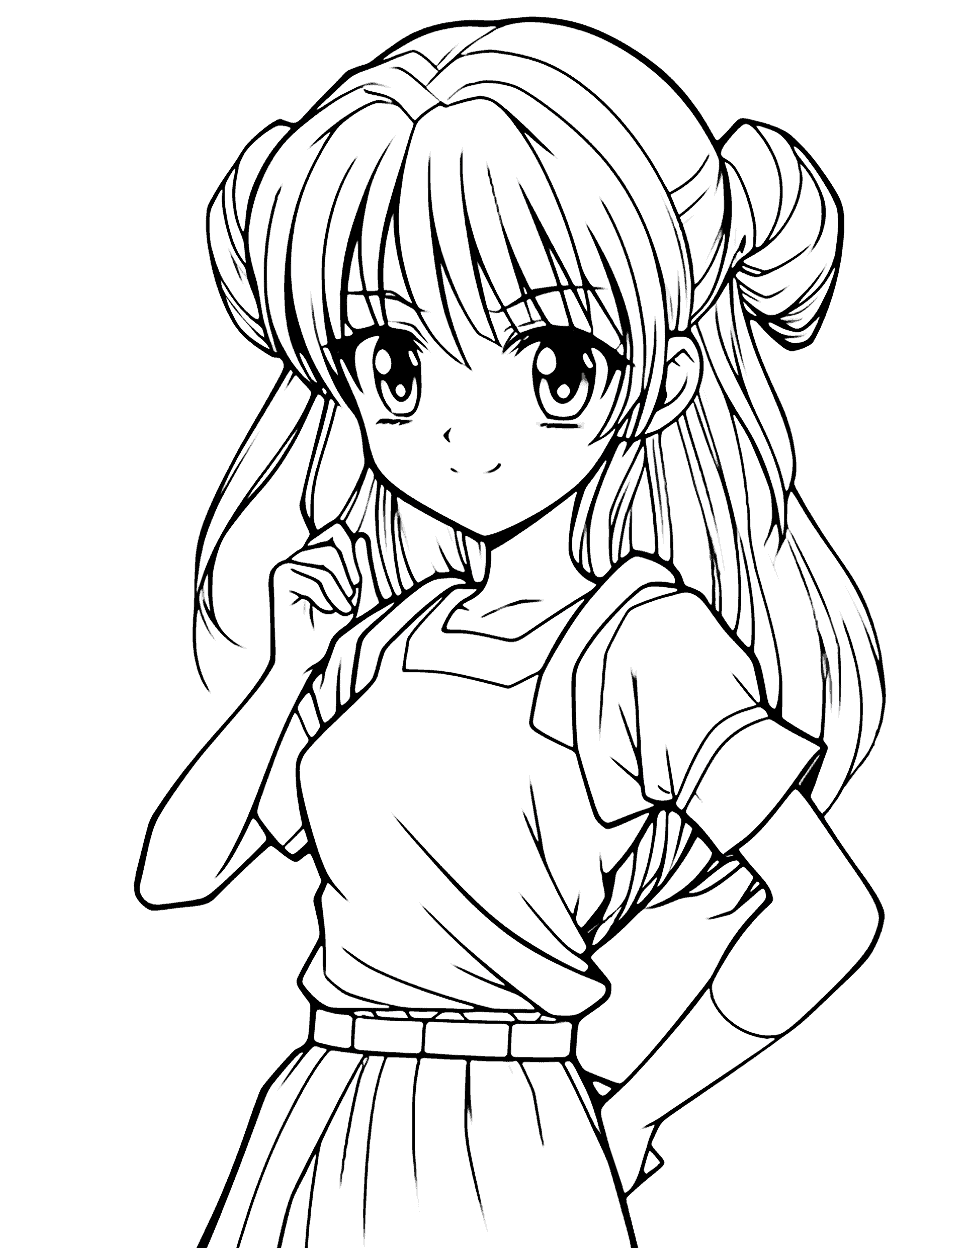 Cute Anime Girl Coloring Page - An image of a cute anime girl with sparkling eyes and a sweet smile.